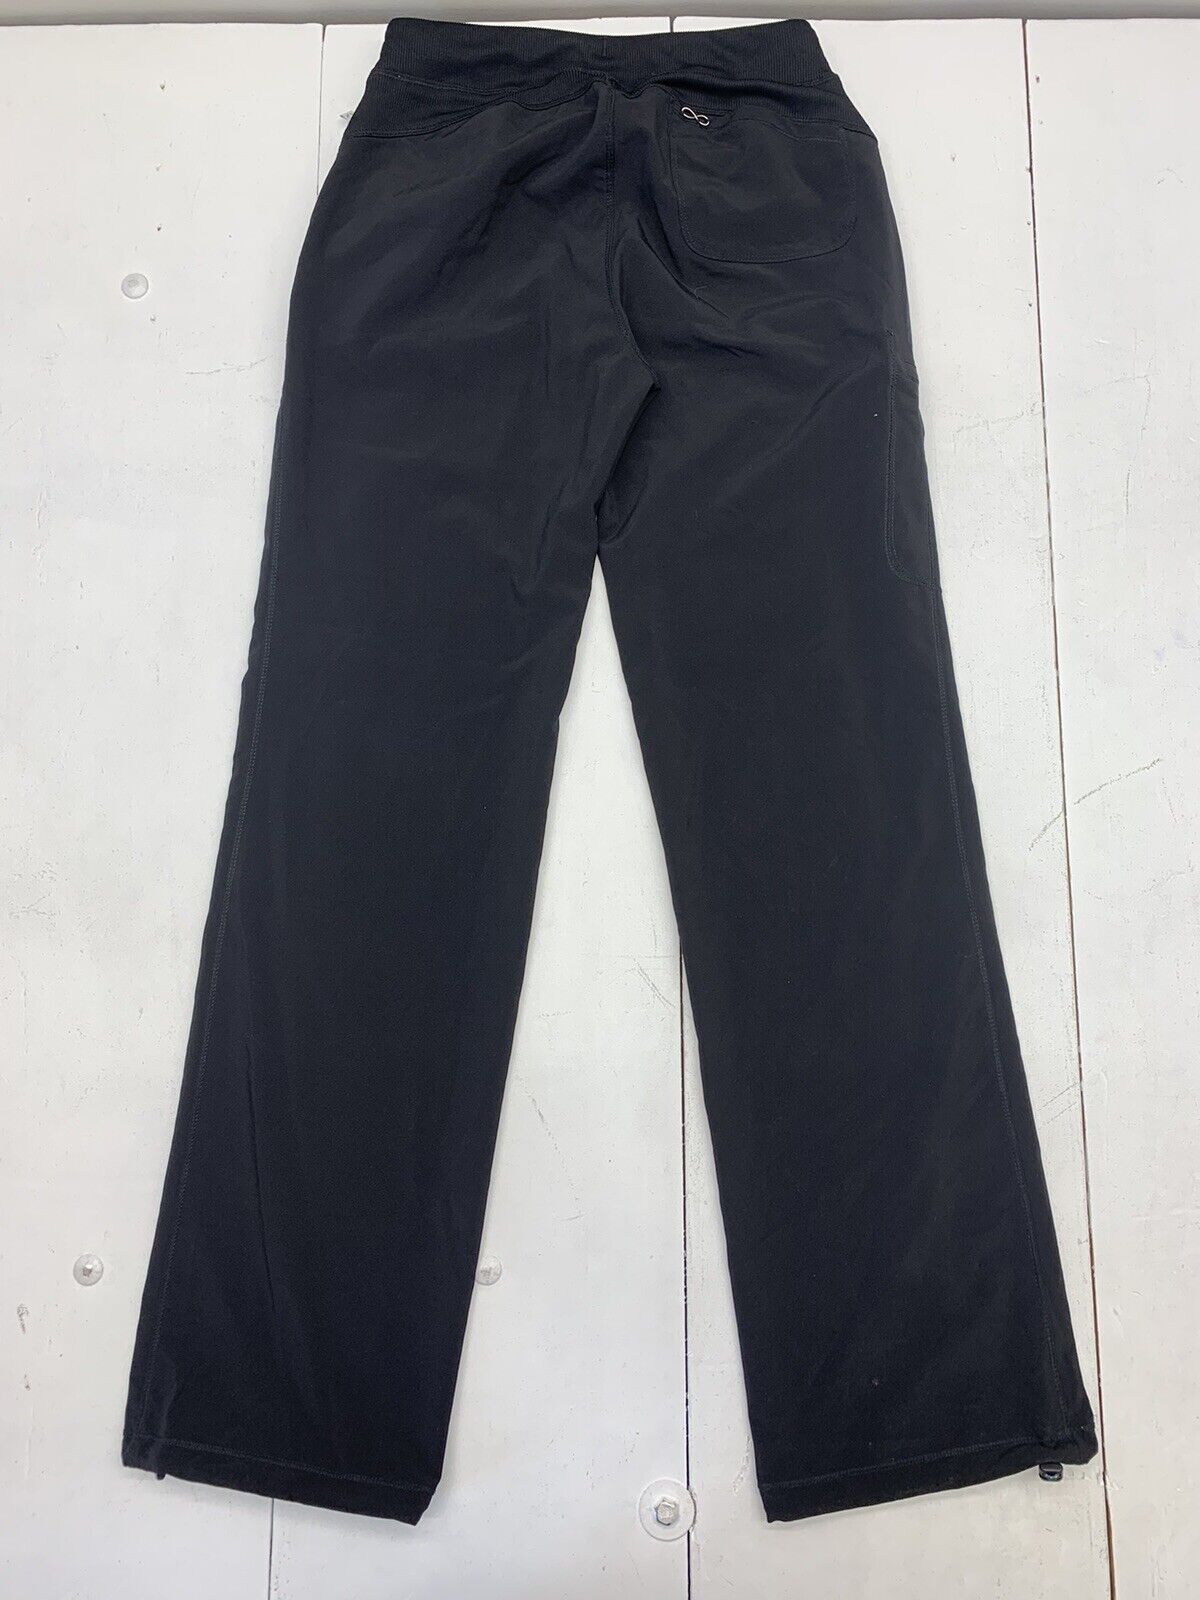 Women's Black Track Pants Size Small Tall - beyond exchange